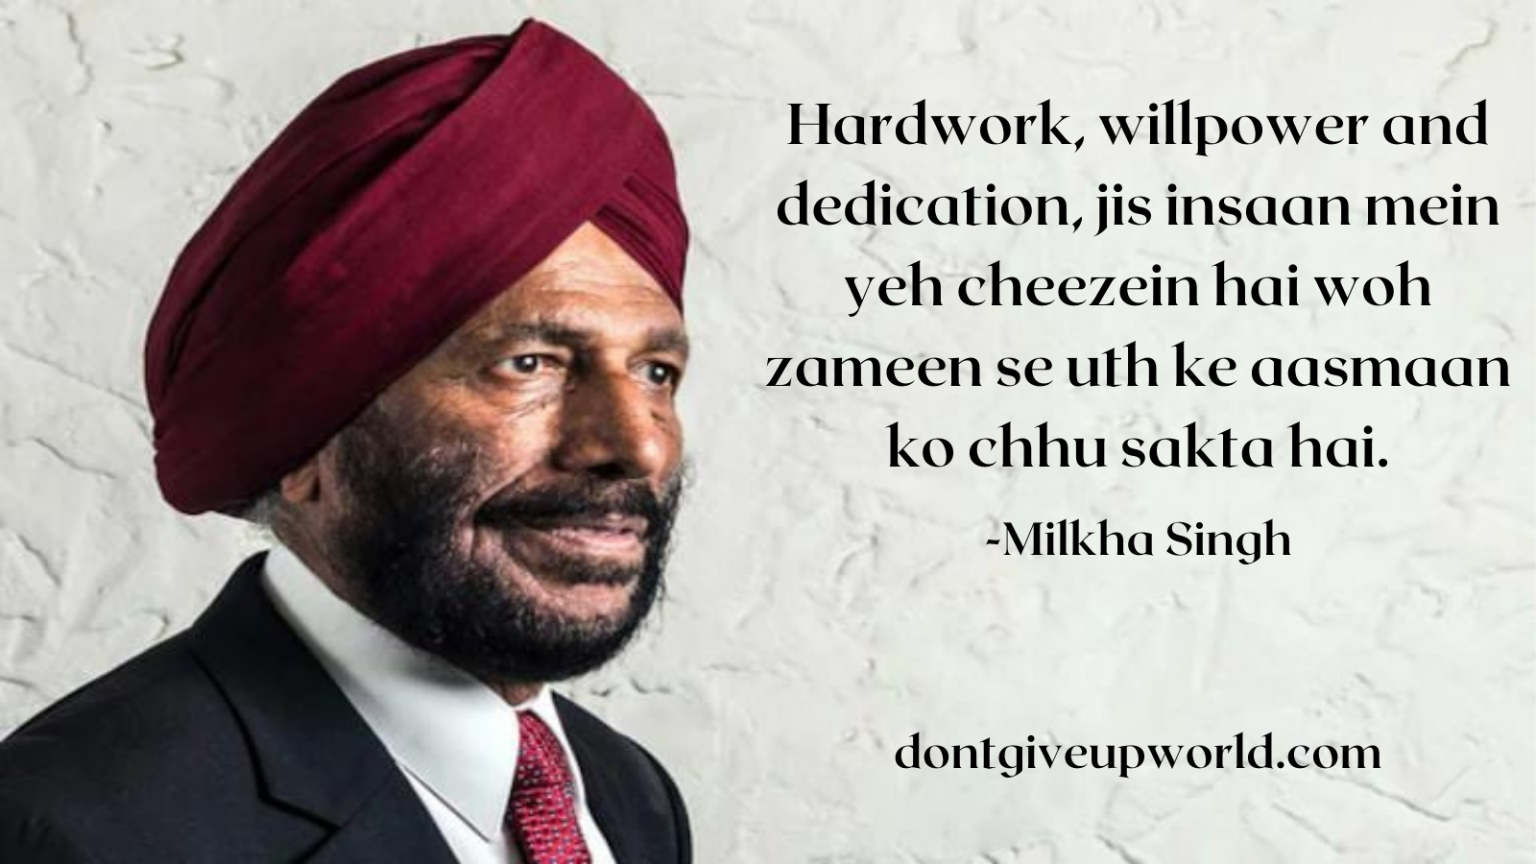 Quote on hard work, willpower, and dedication by Milkha Singh - Dont